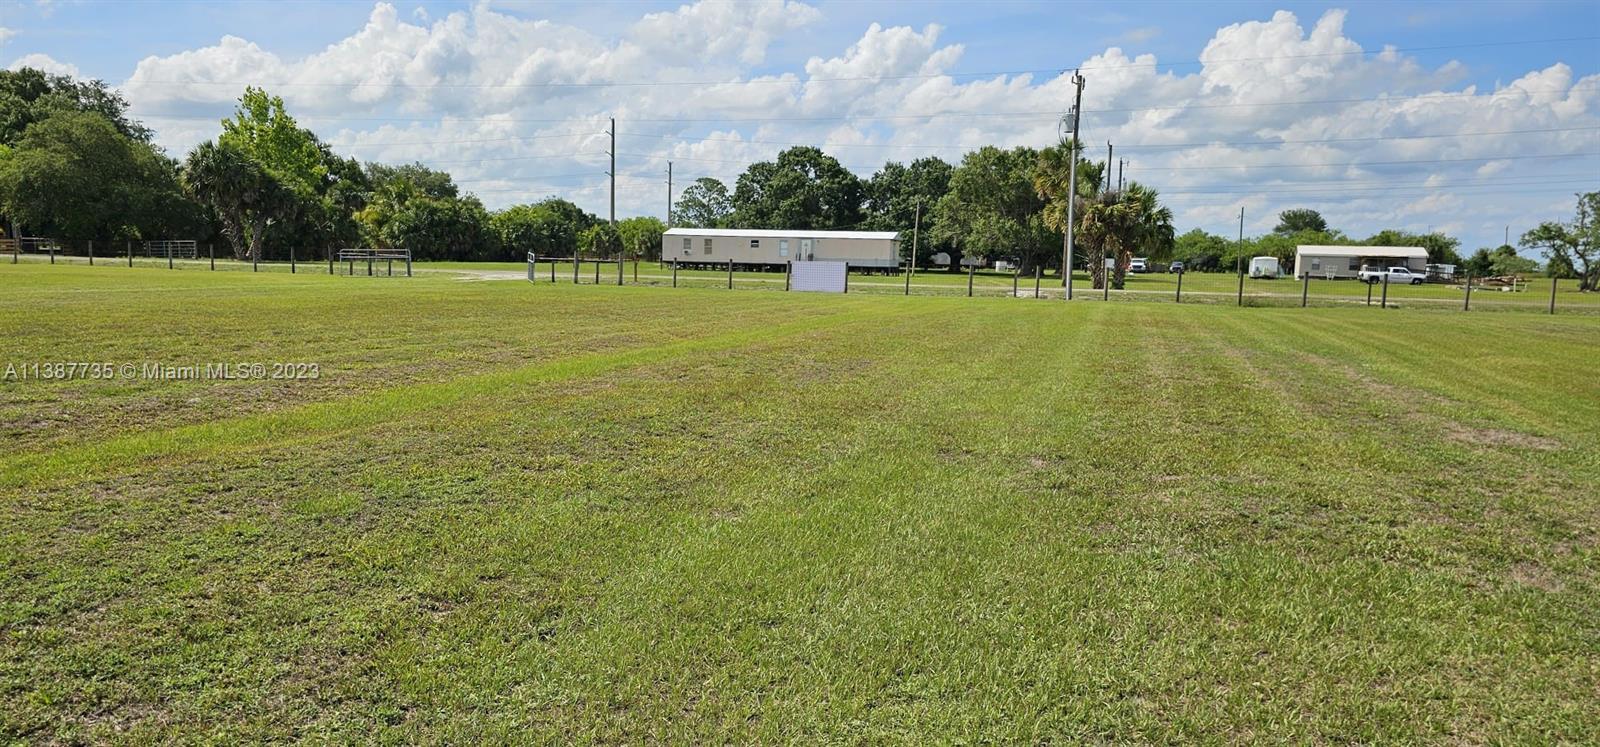 Photo of 208 Kilpatrick Rd in Clewiston, FL